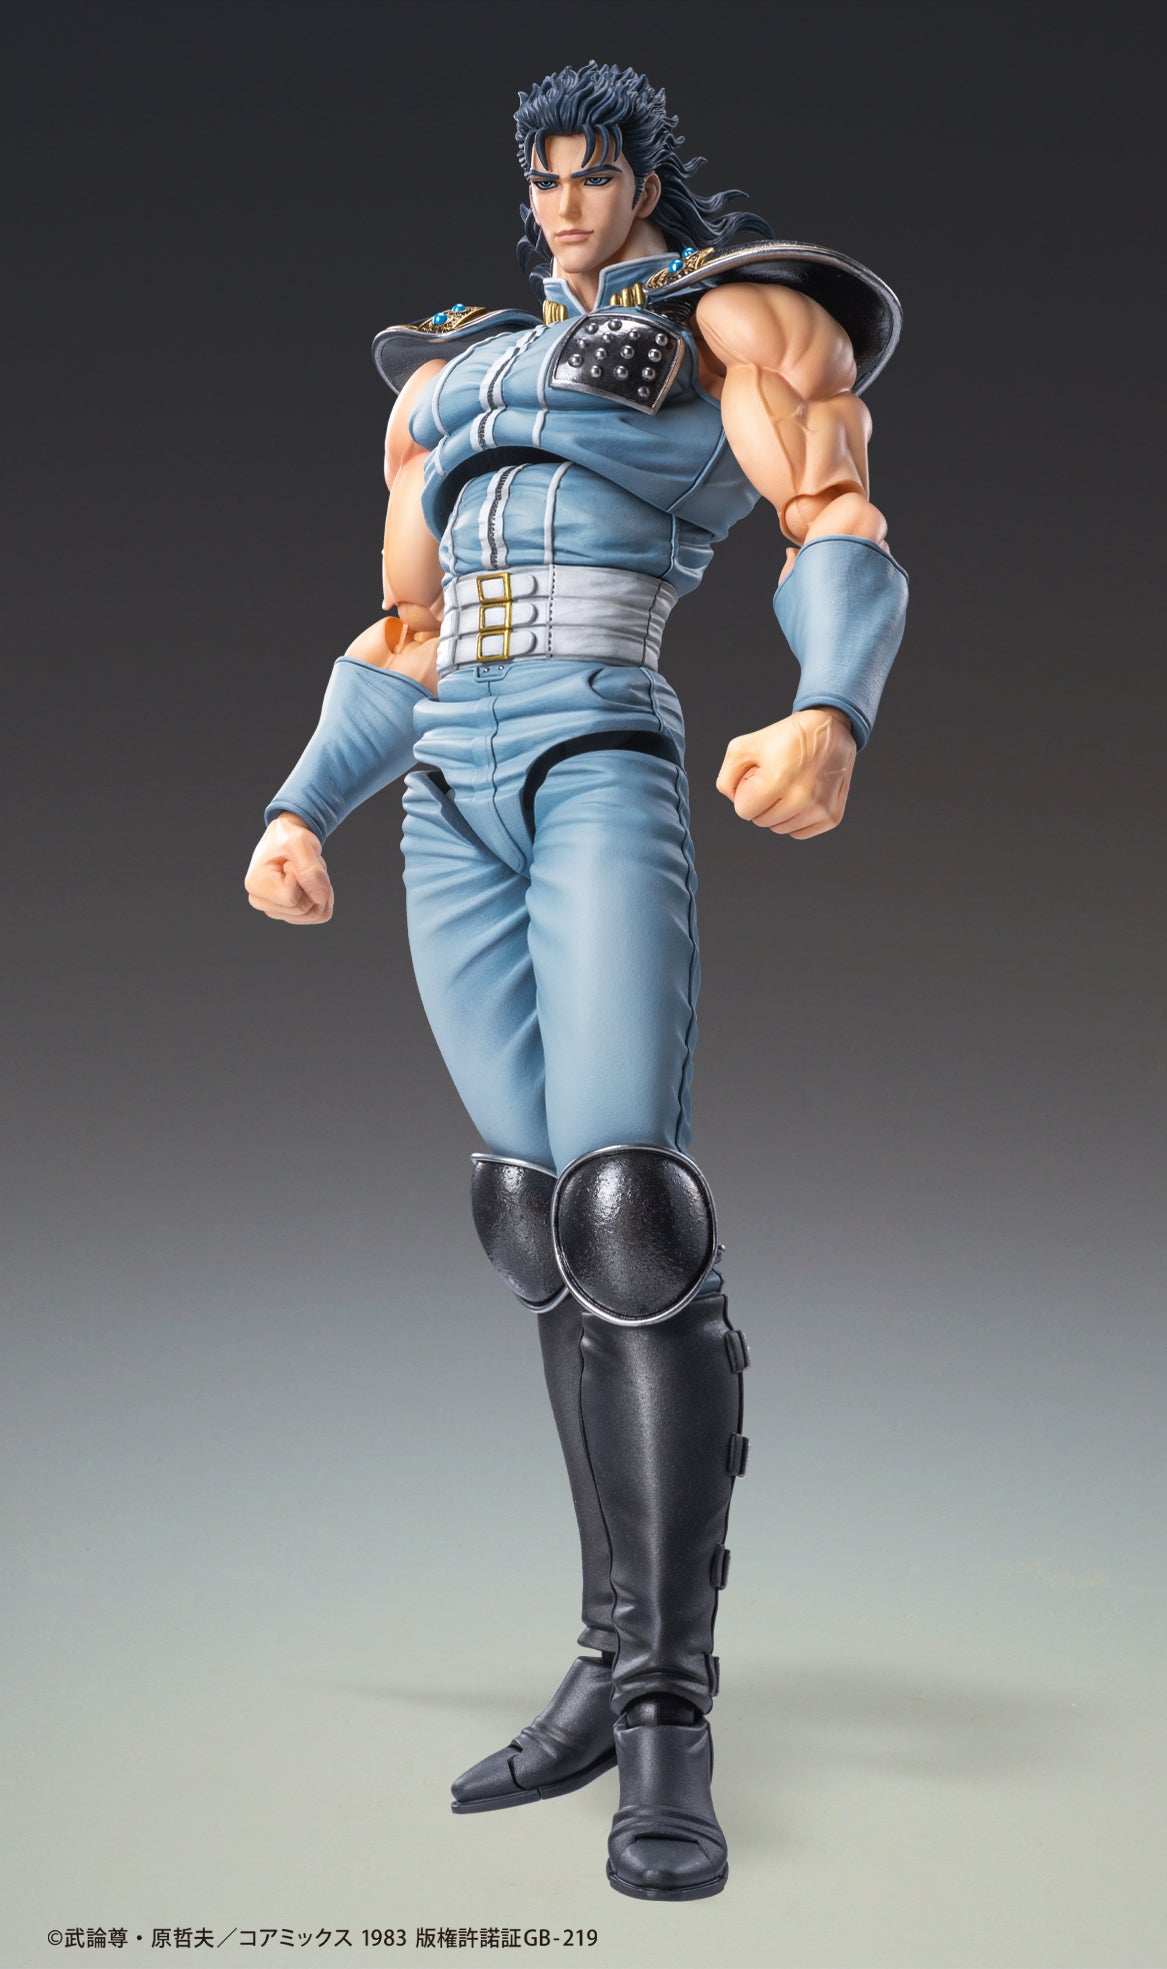 Fist of the North Star (Hokuto no ken) figures and goods